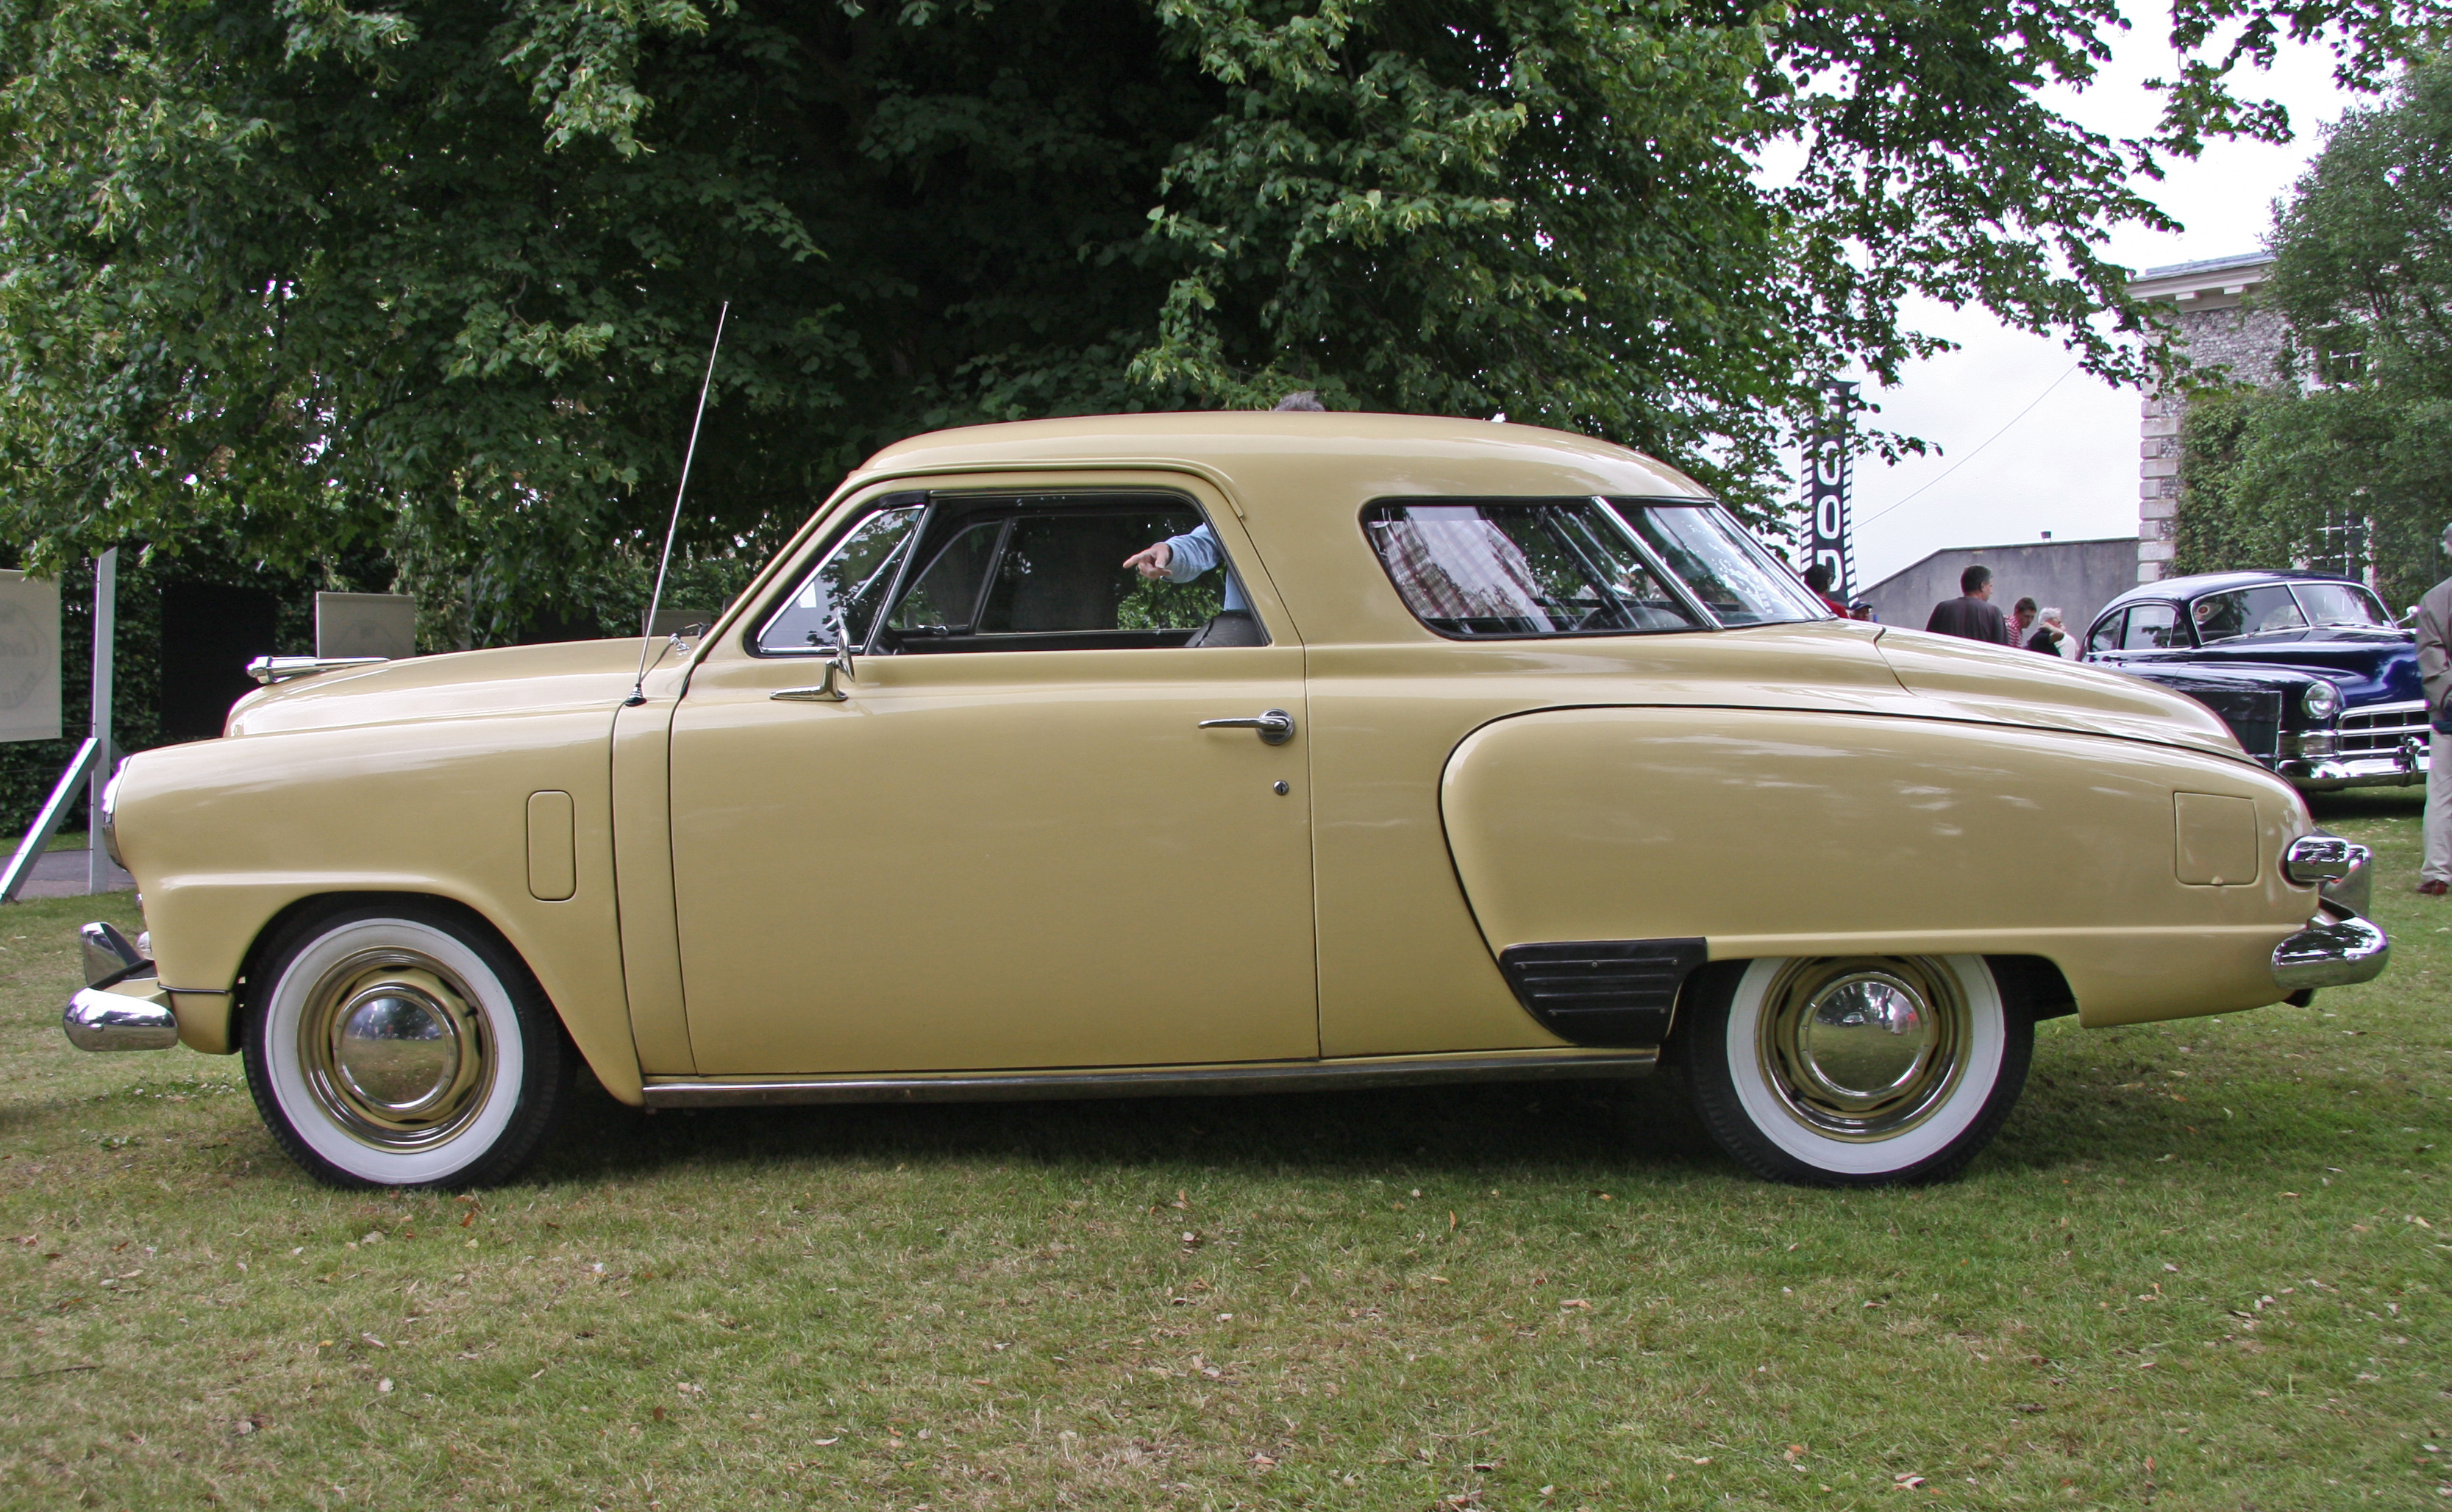 1949 Studebaker Champion 2 Dr. Coupe | Flickr - Photo Sharing!